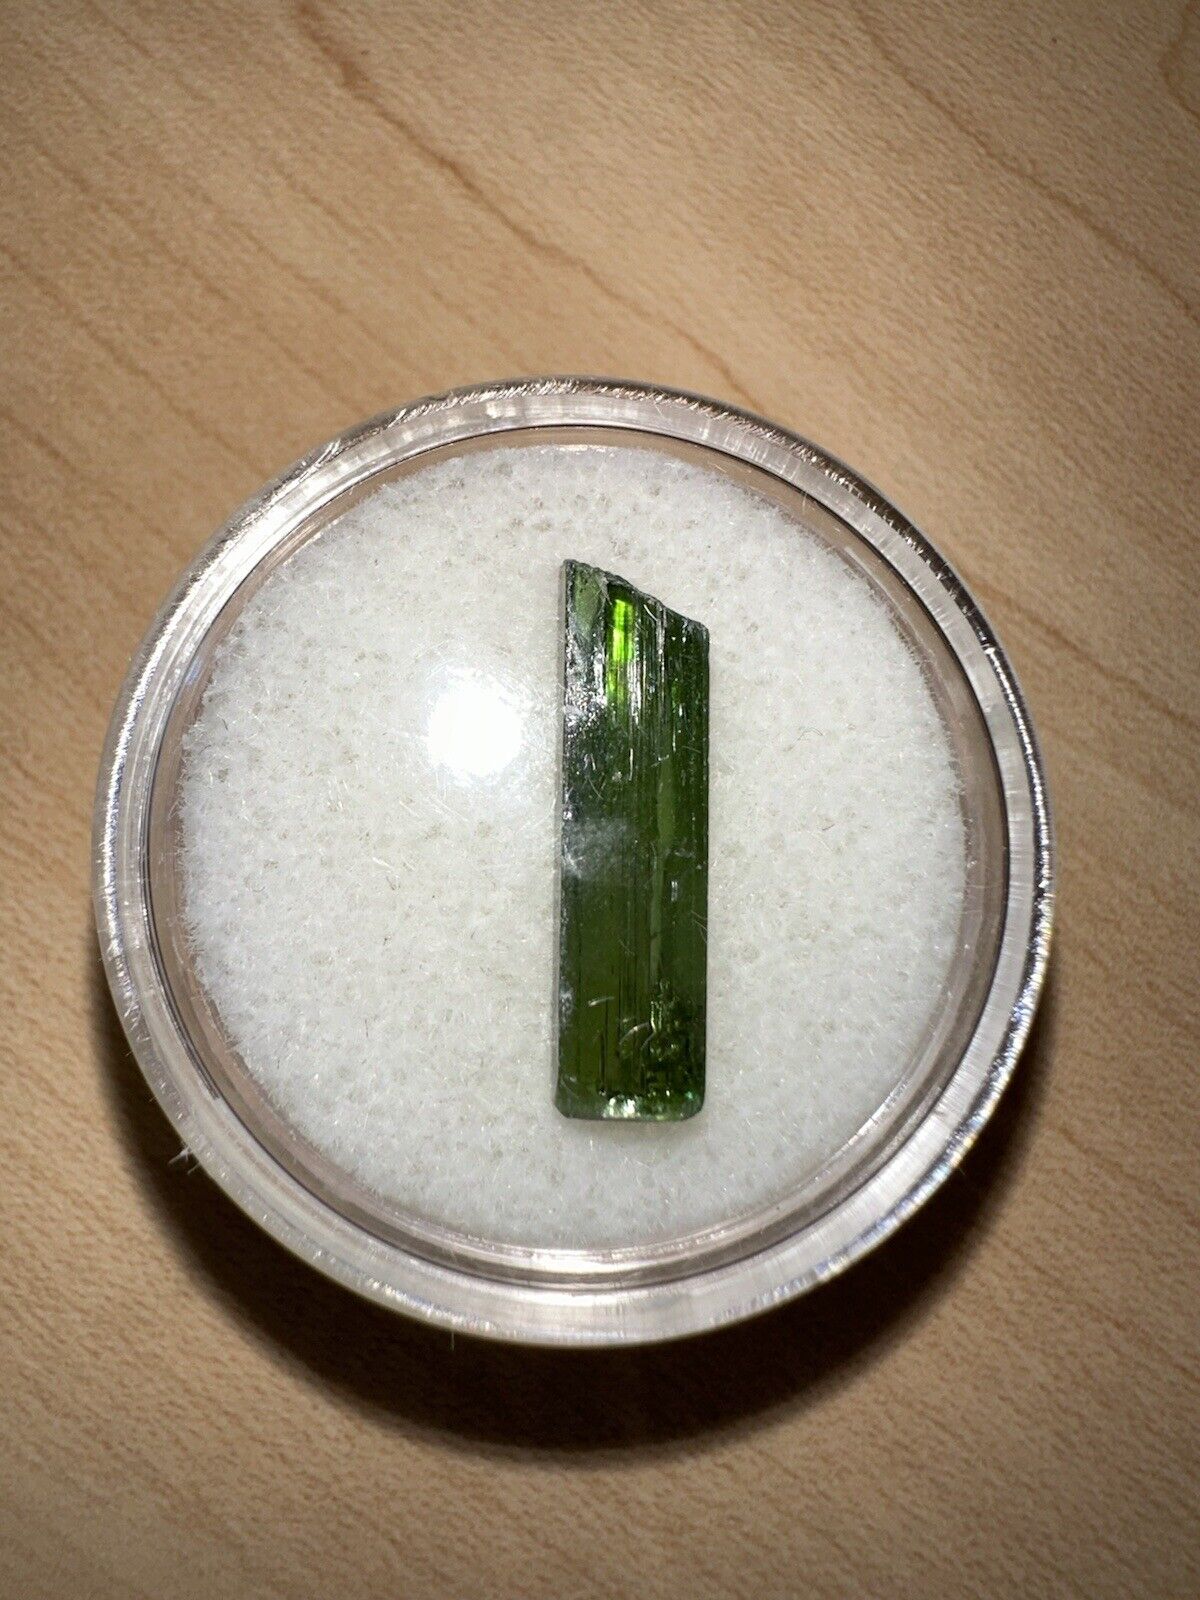 Chrome Diopside - Weight 0.85 Grams